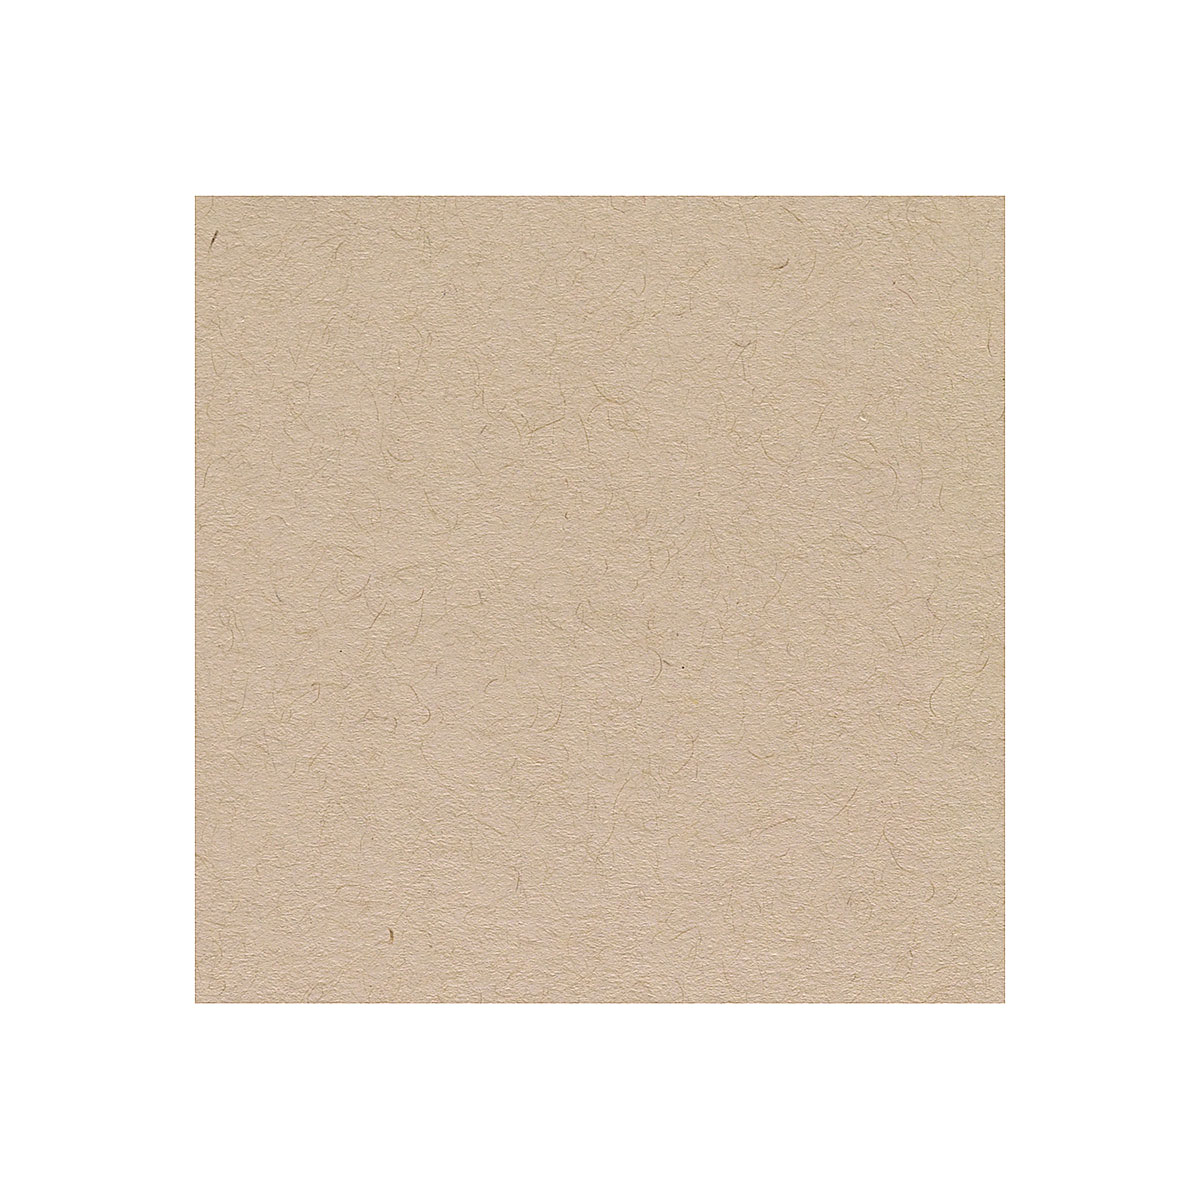 Strathmore Toned Sketch Paper Pad 18X24-80lb Toned Gray 24 Sheets -  012017412288